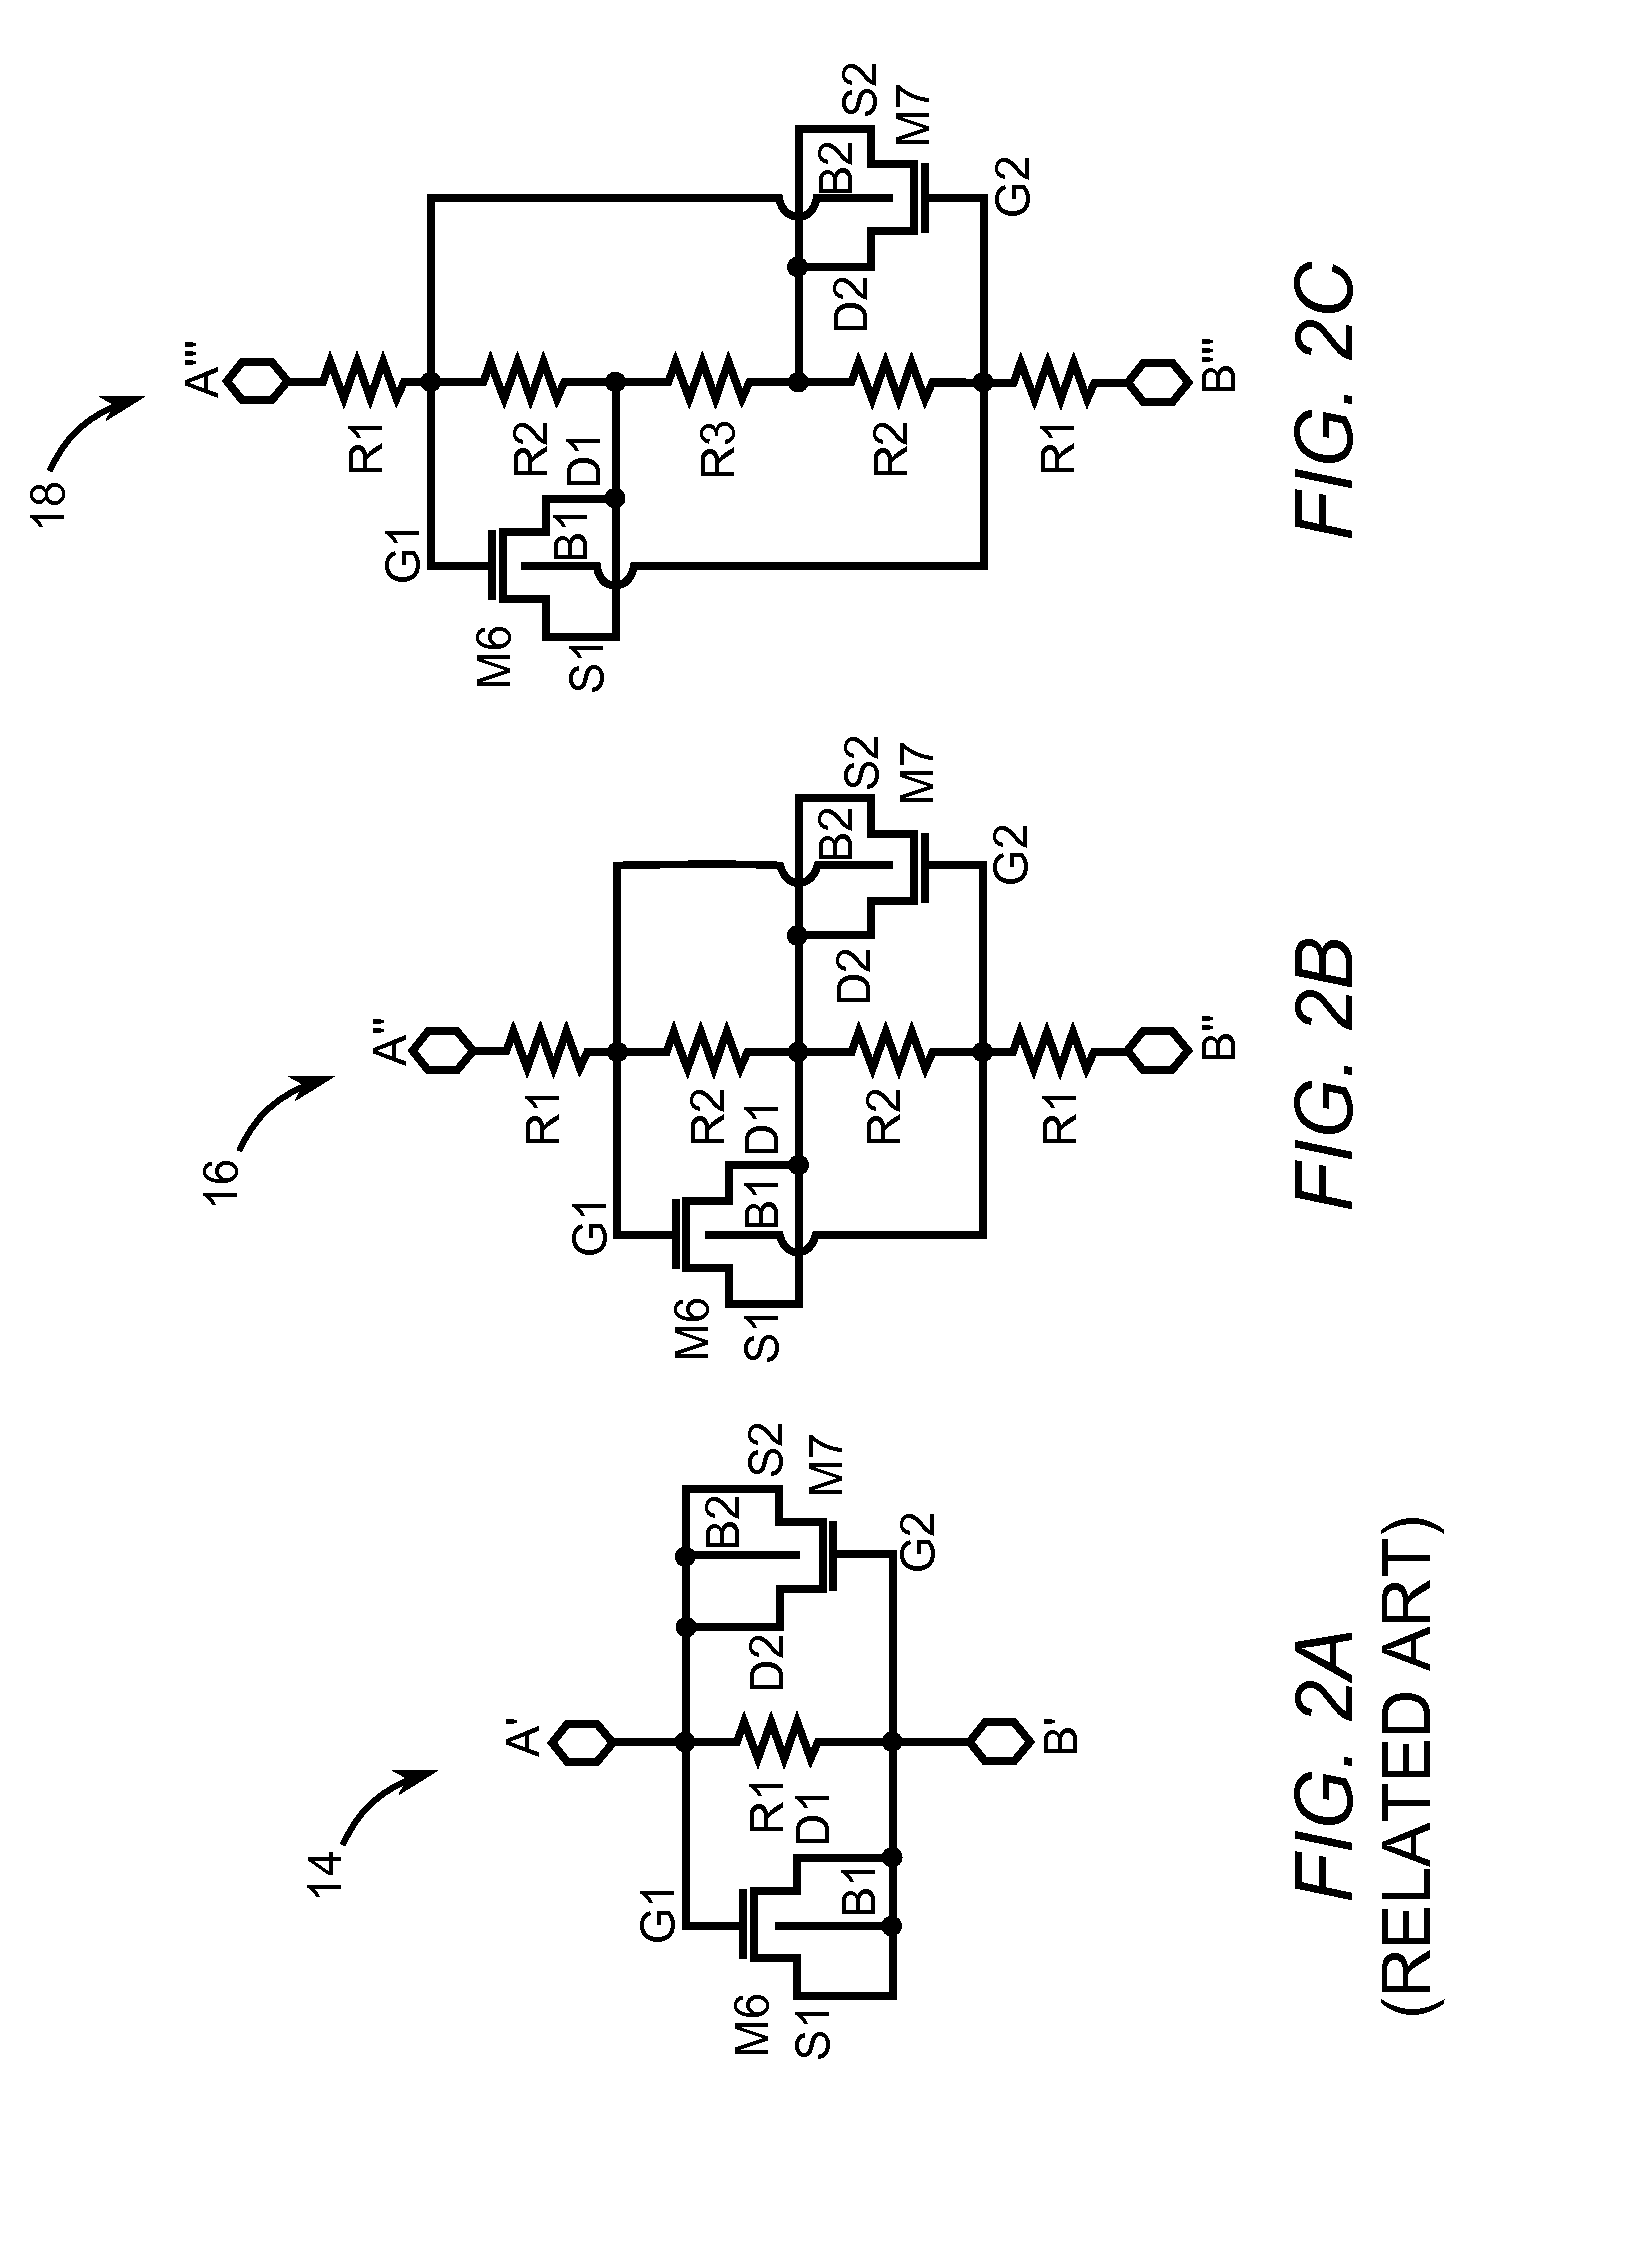 Harmonic cancellation circuit for an RF switch branch